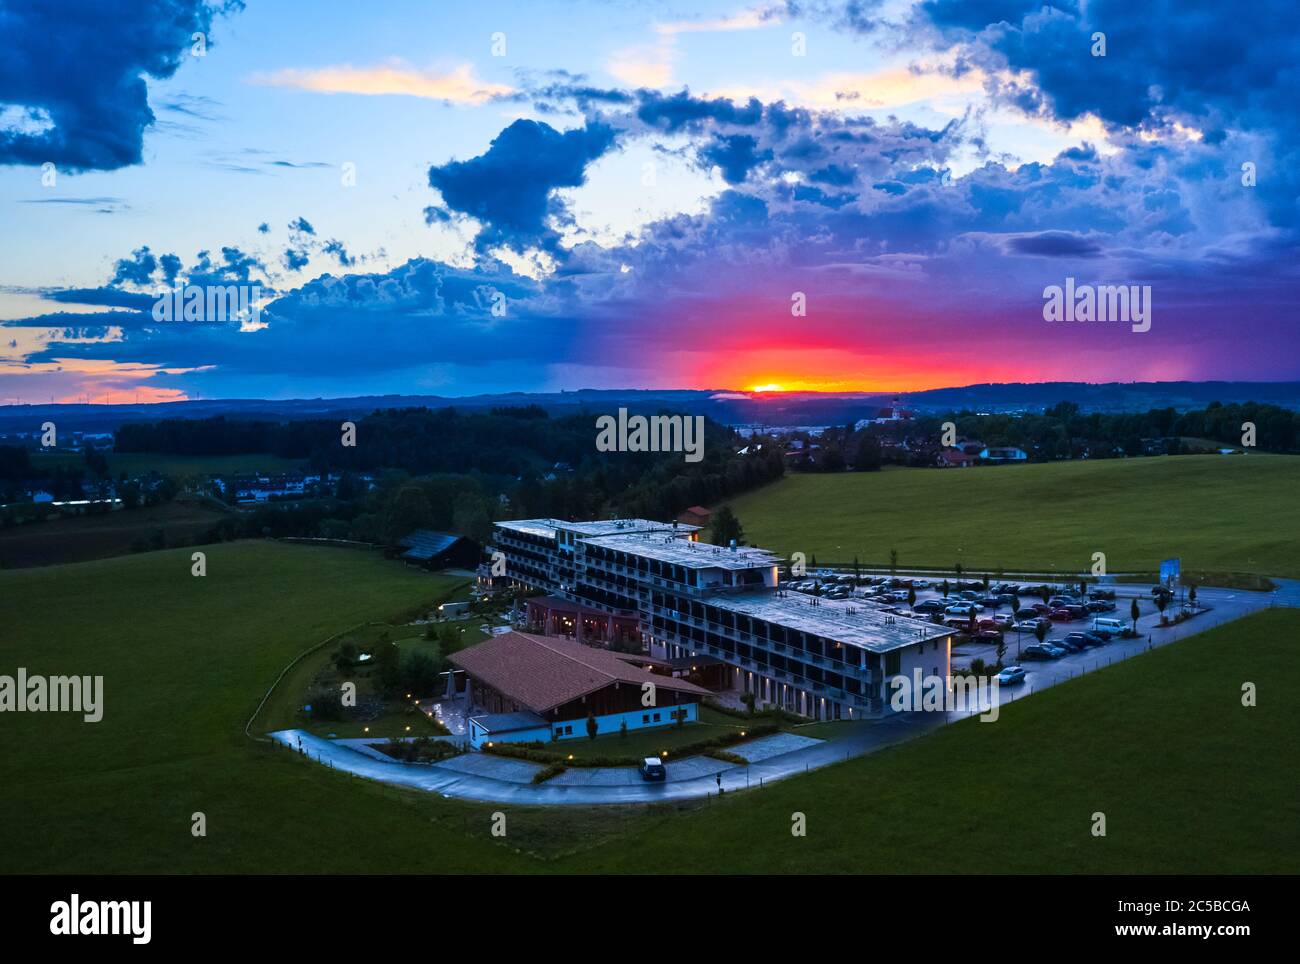 Marktoberdorf, Germany, July 01, 2020. Hotel WEITBLICK, a place to spend  holidays and relax. Aerial drone image Dji Mavic 2 pro. © Peter Schatz /  Alamy Stock Photos Stock Photo - Alamy